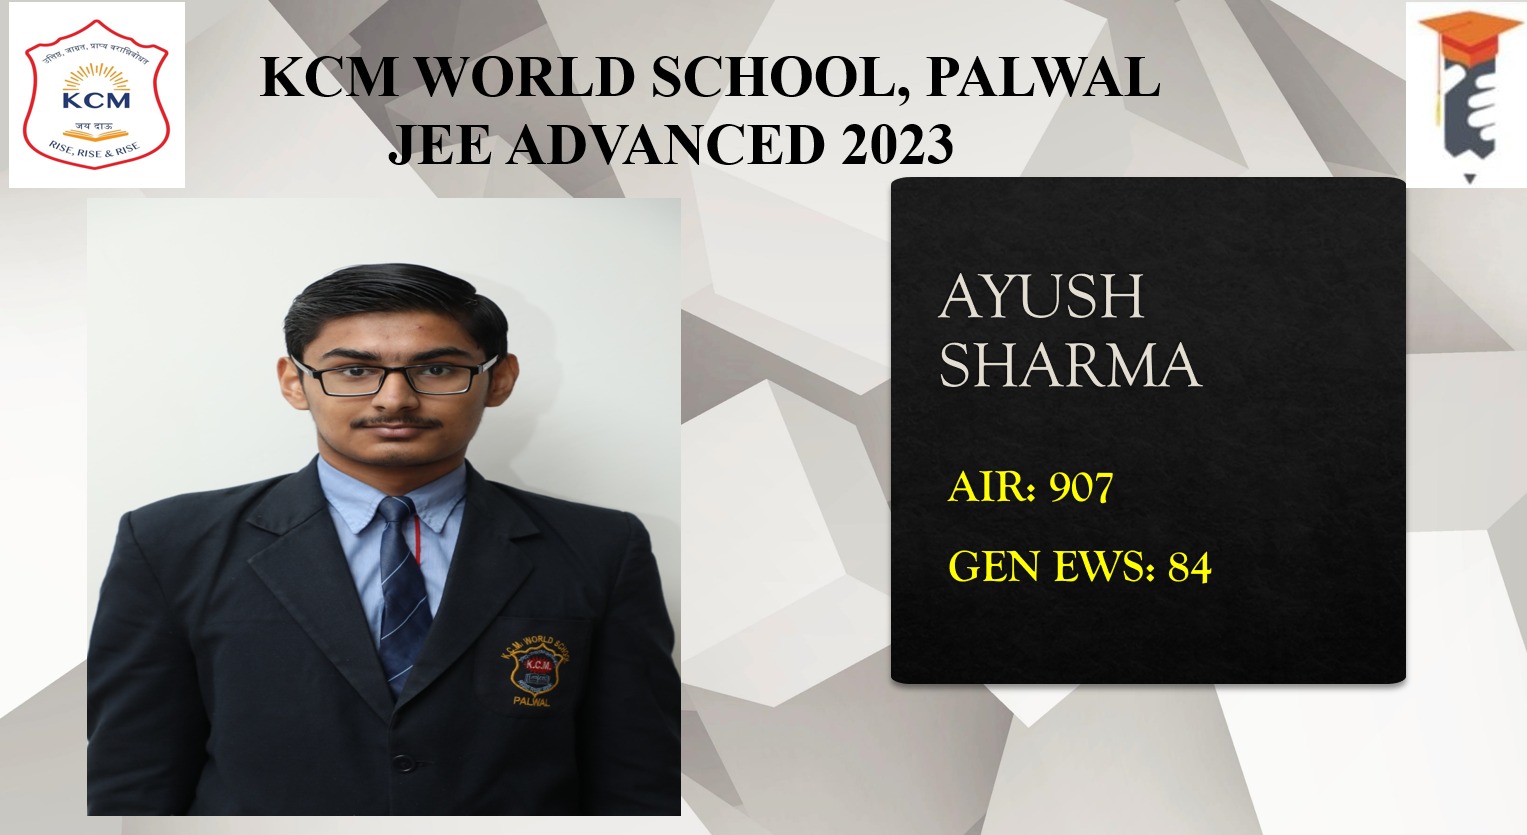 “District Dominators: Topping the Charts in JEE Advanced 2023!”